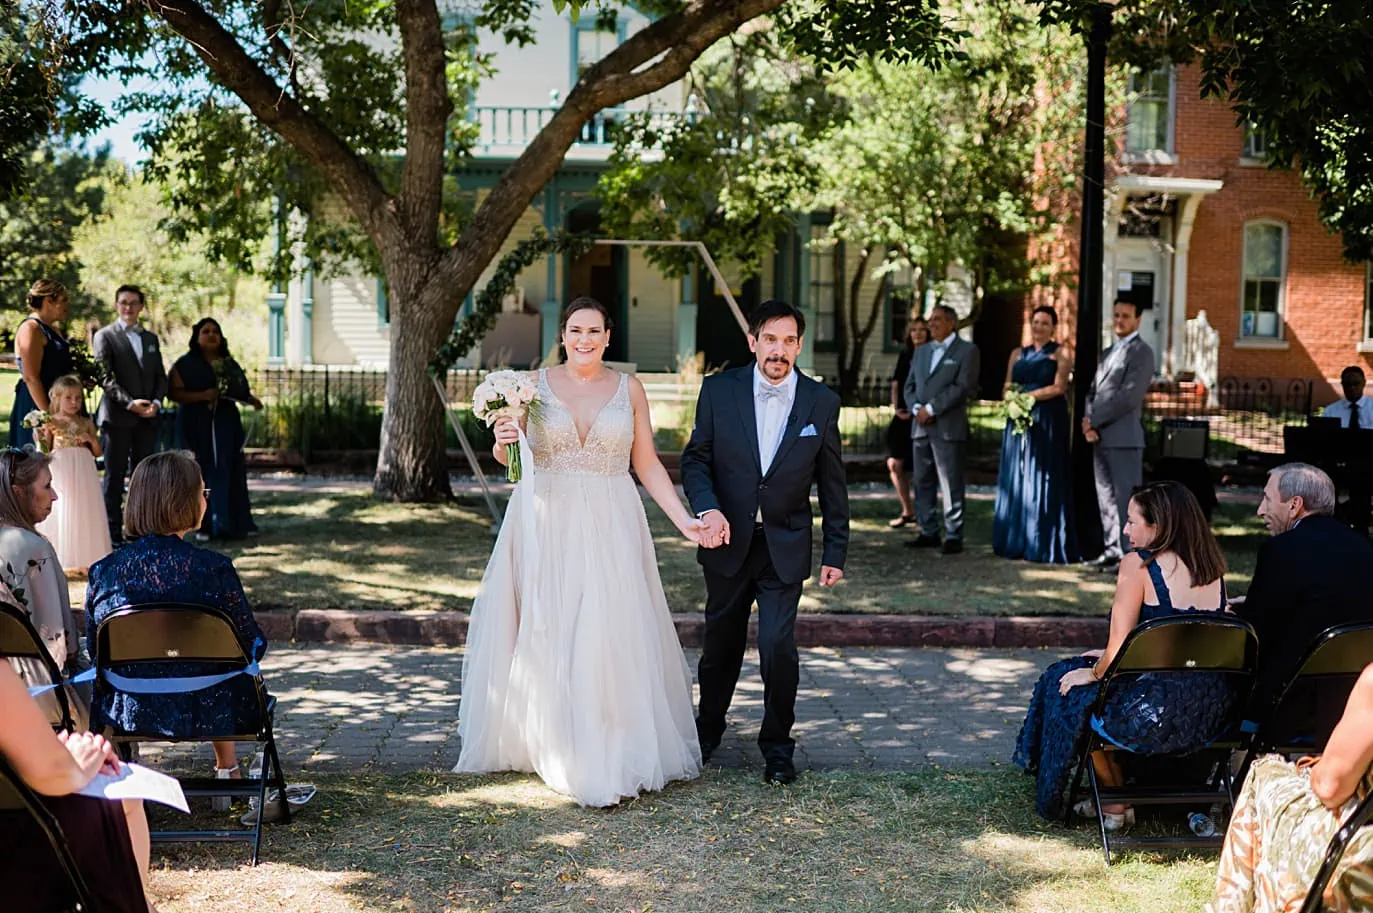 Bride and groom walk back down aisle after their wedding ceremony at 9th street park at Auraria Campus